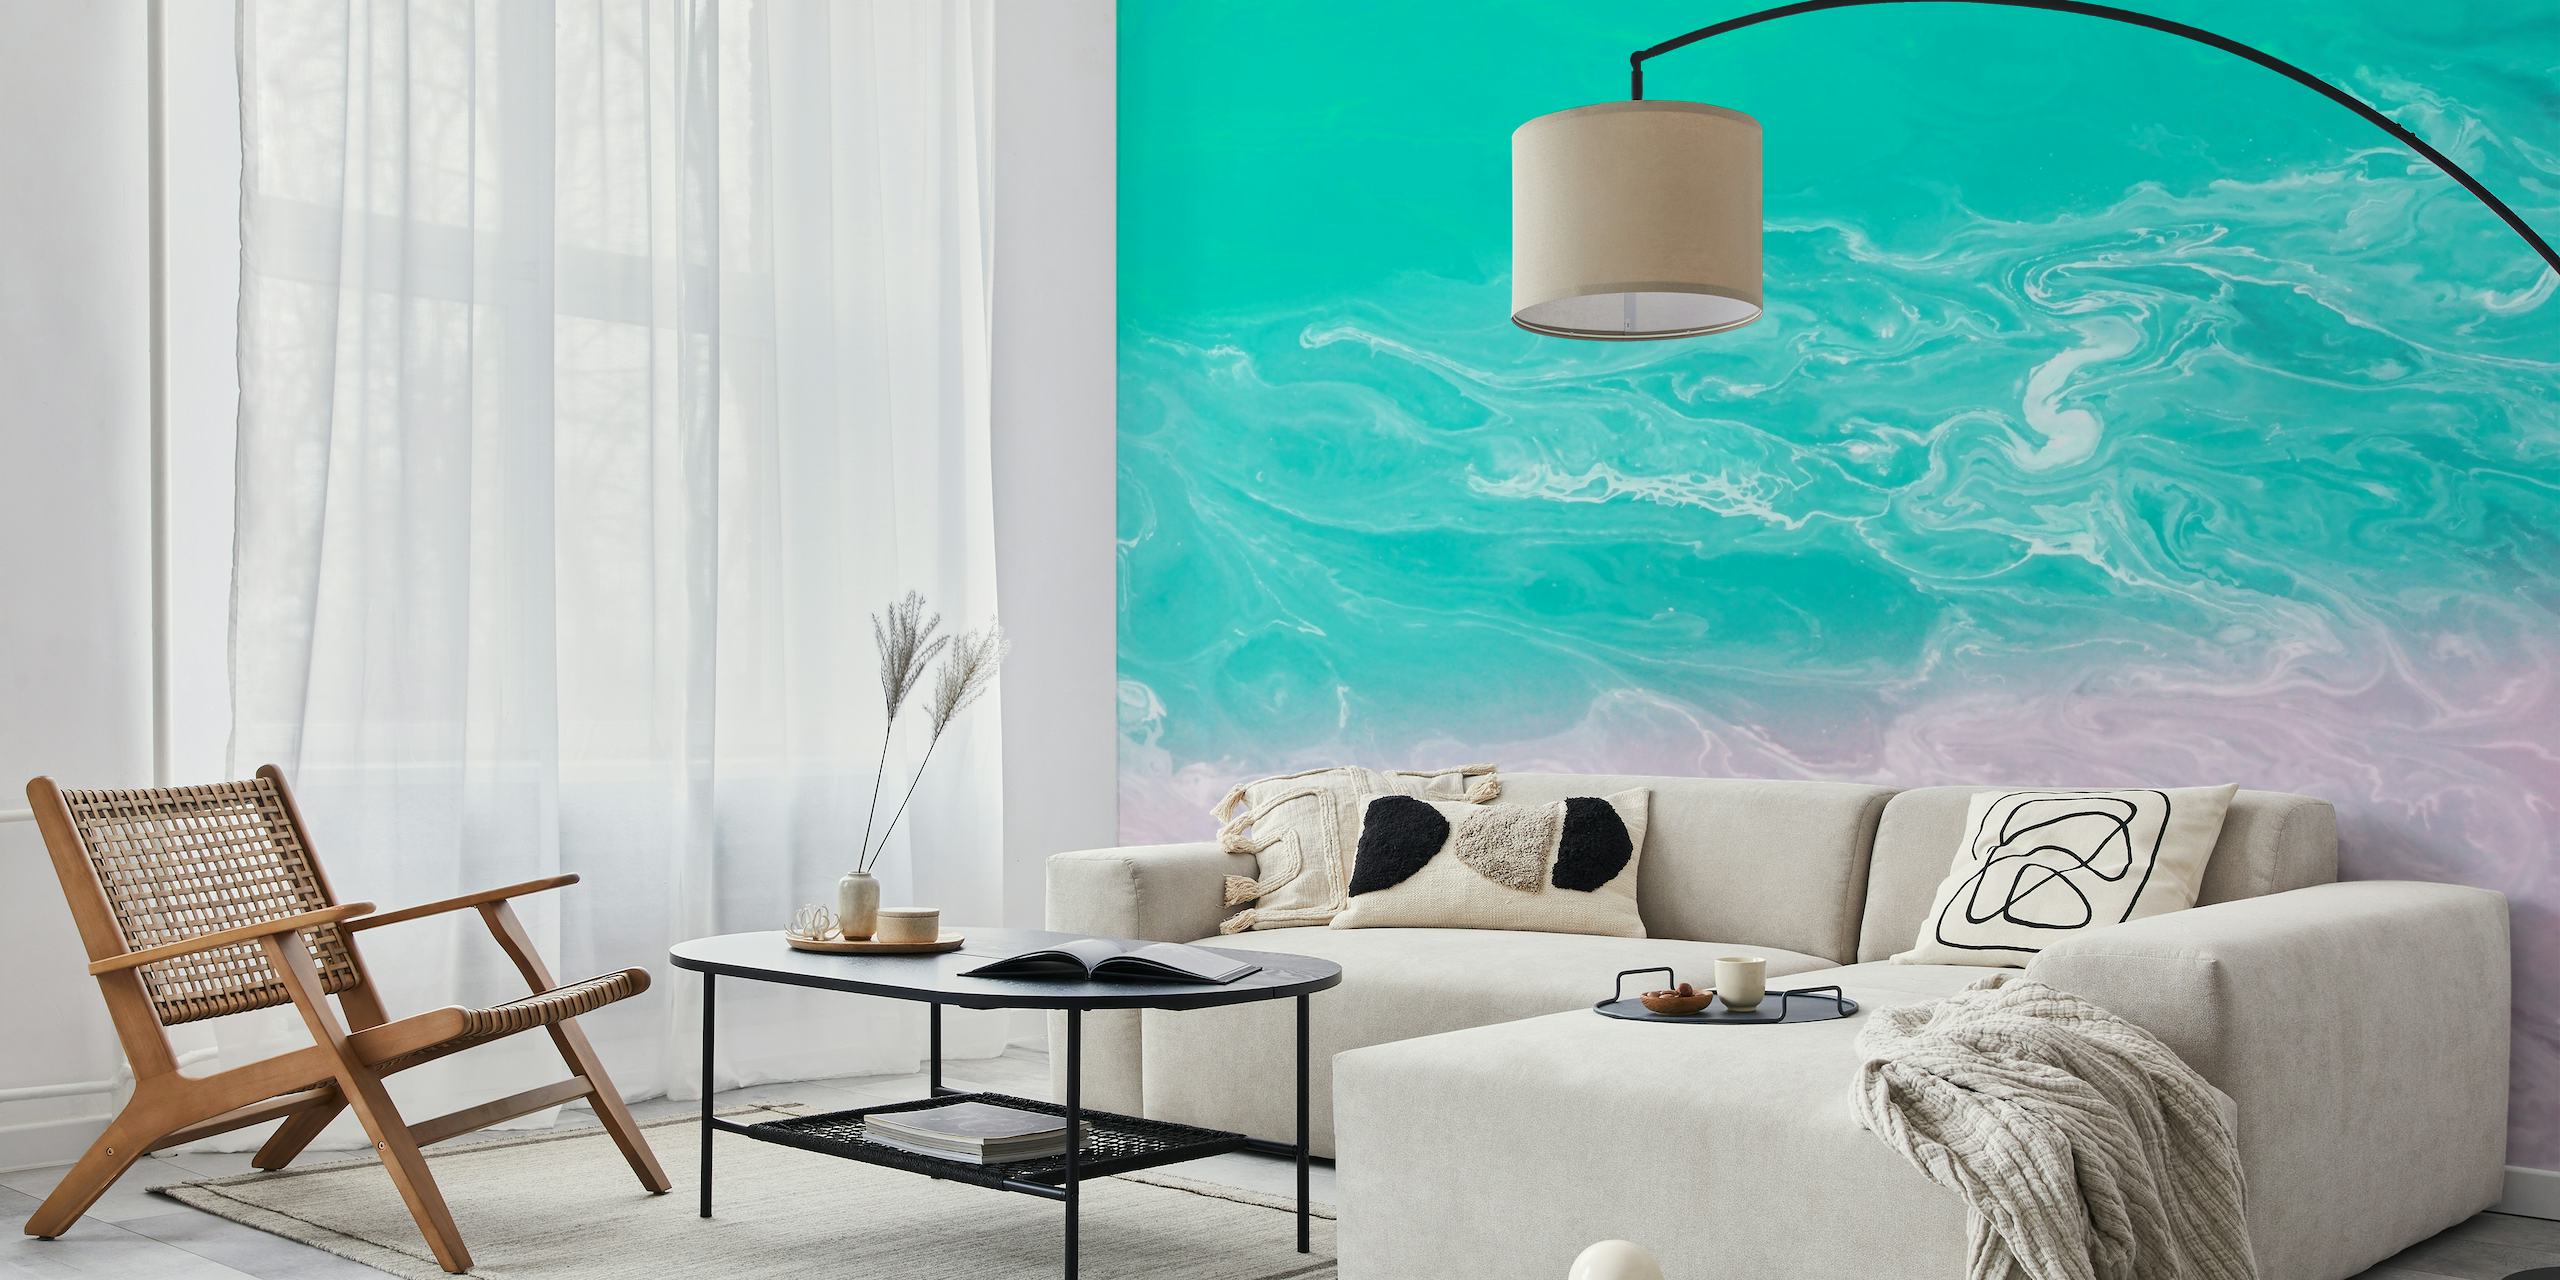 Turquoise Ocean Beach Vibes wall mural depicting the clear and tranquil waters meeting the soft sandy shore